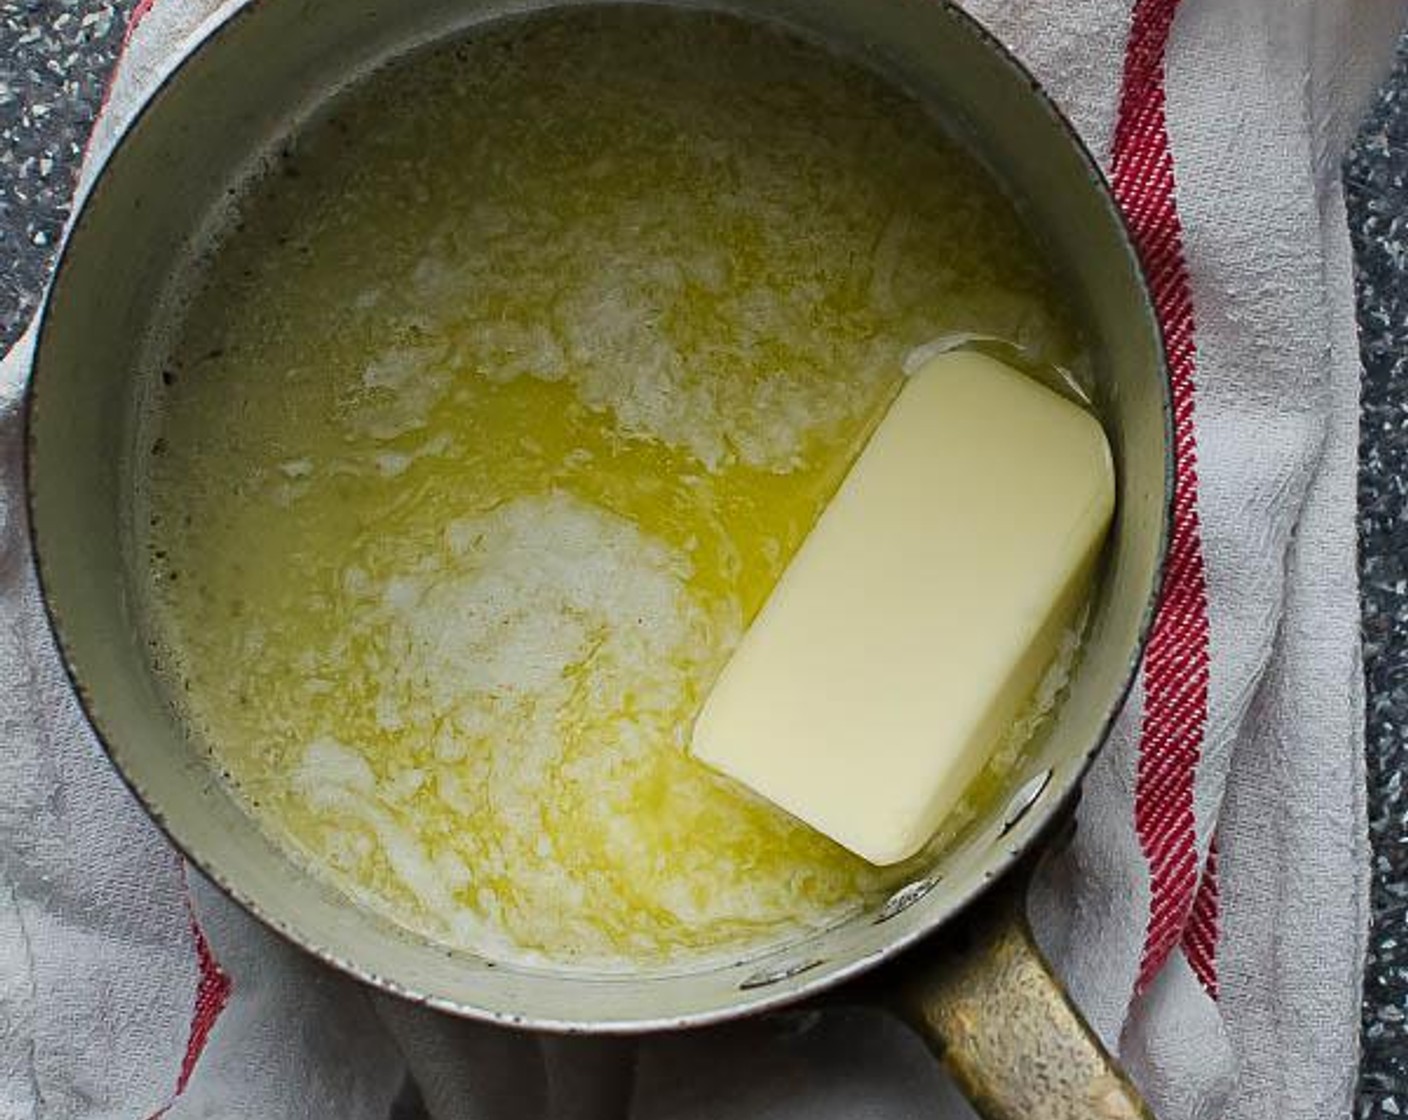 step 3 Melt the Unsalted Butter (1/4 cup) in a small saucepan over medium high heat and add the Garlic (1 clove). Cook for about 1 to 2 minutes so that the butter is fragrant.